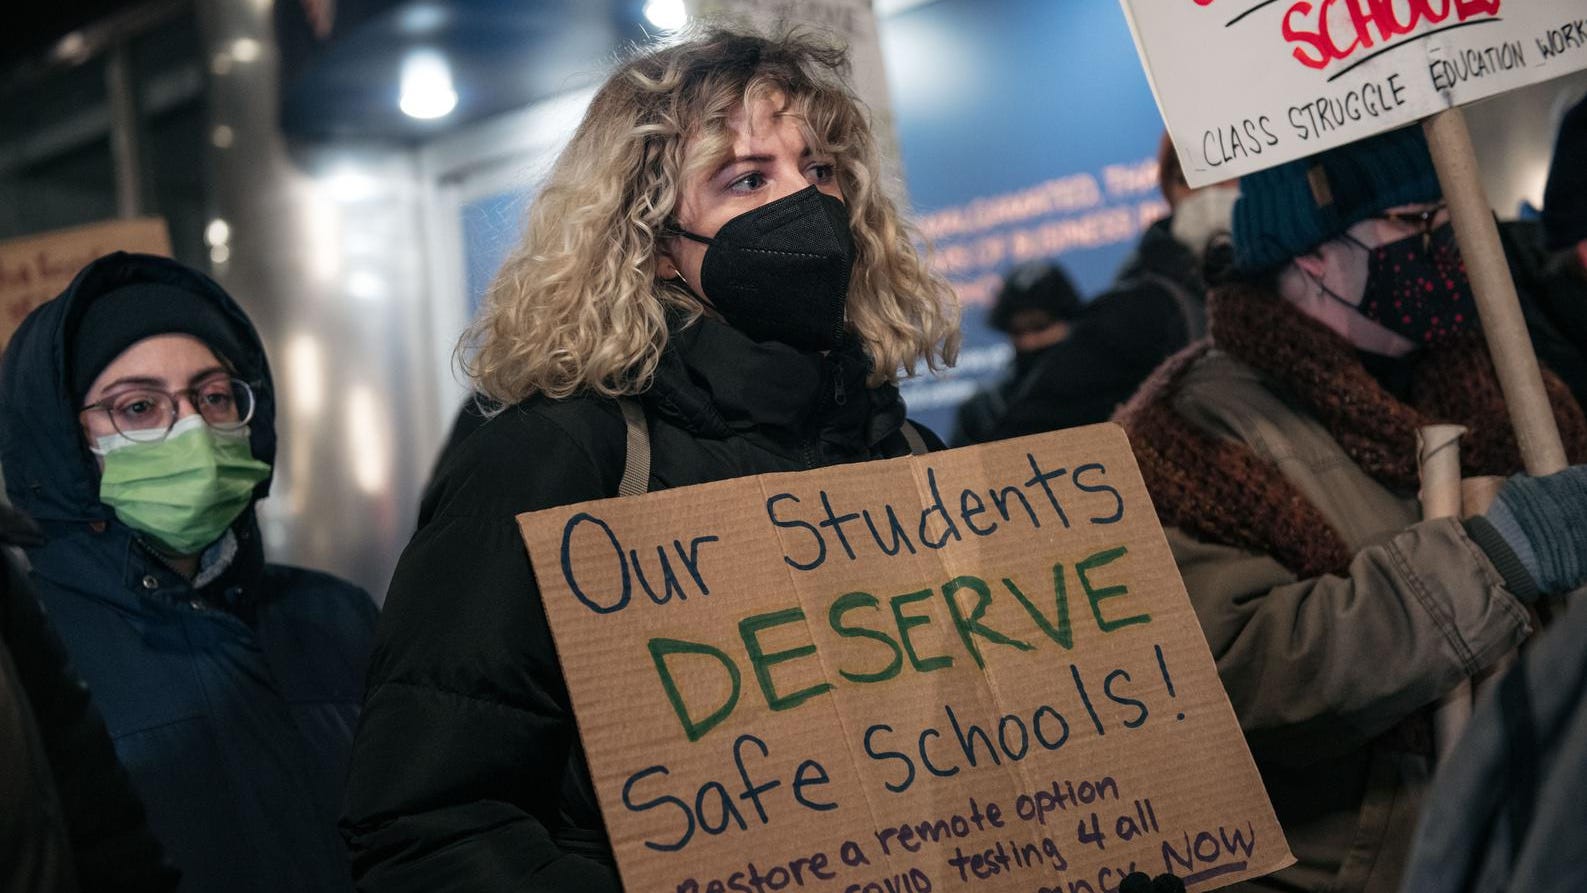 A woman wears a black mask during a protest, the sign says, "our students deserve safe schools"